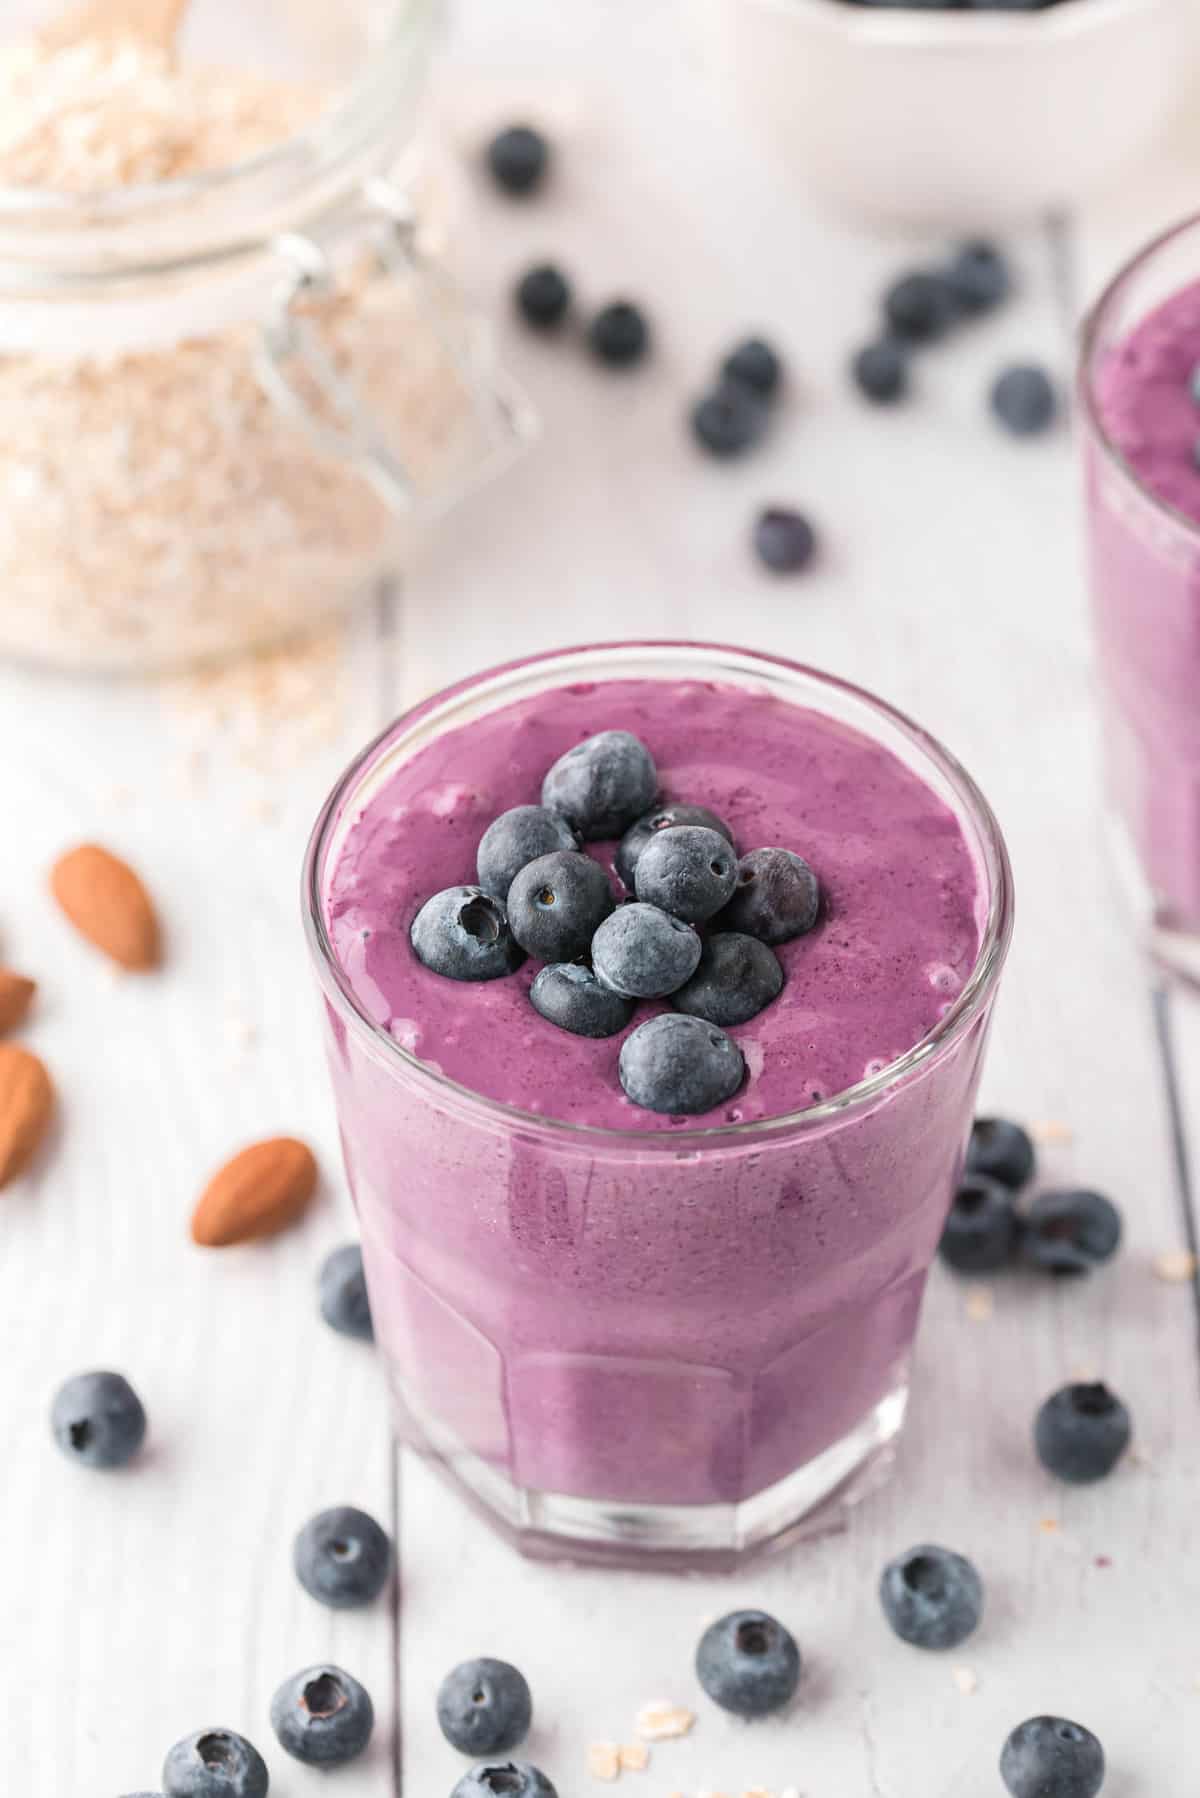 Blueberry smoothie in small glass, topped with fresh bluberries.